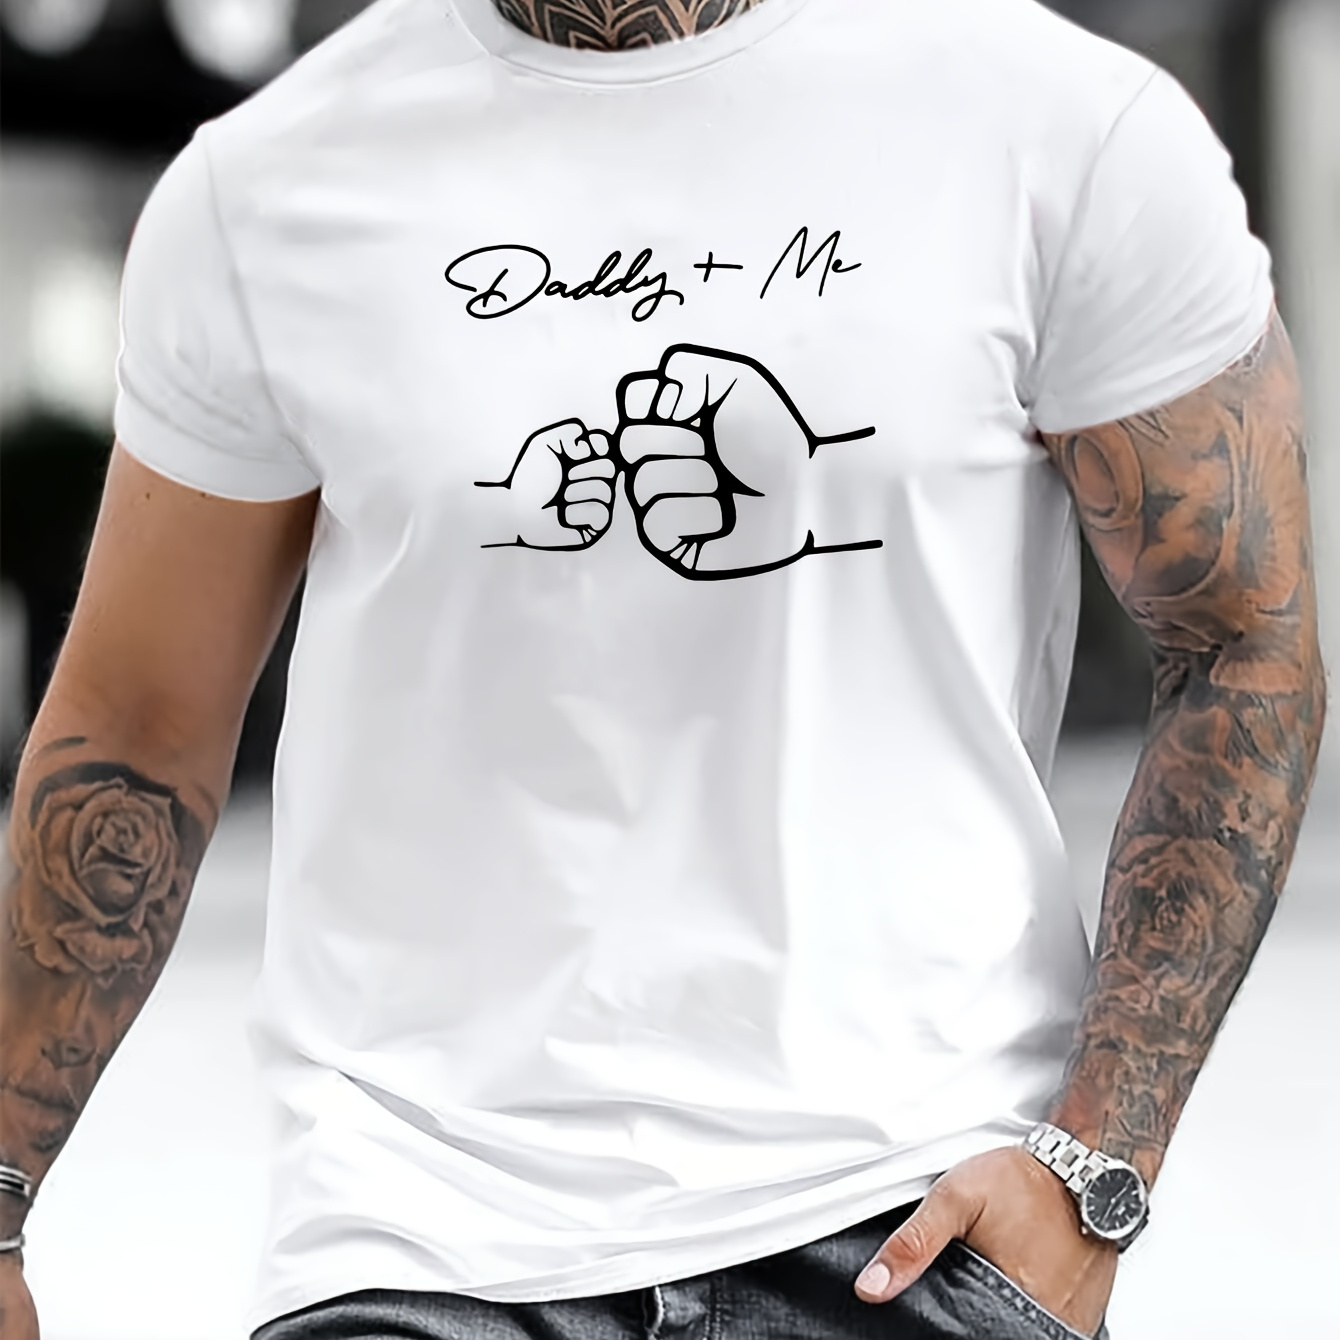 

Daddy And Me Print Tee Shirt, Tees For Men, Casual Short Sleeve T-shirt For Summer